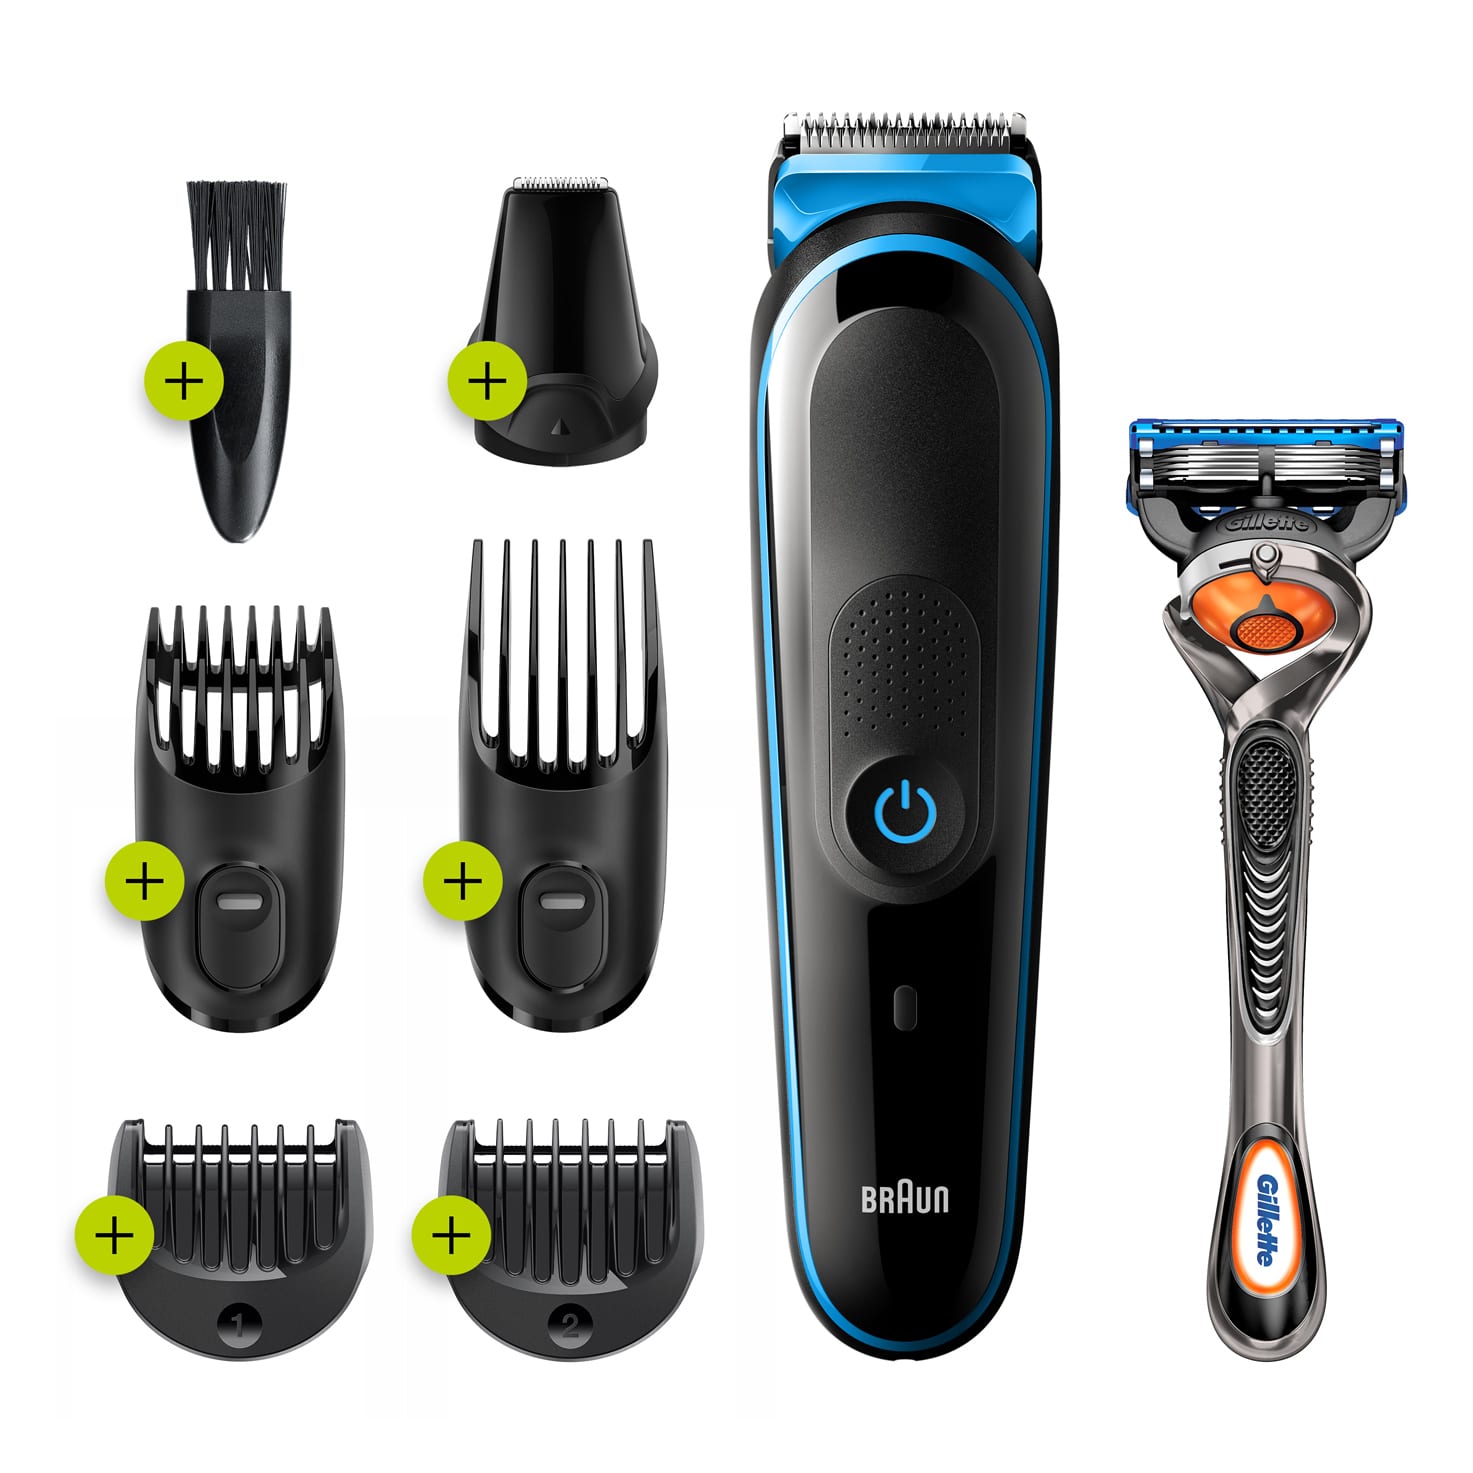 All-In-One Trimmer Mgk5245, 7-In-1 Trimmer